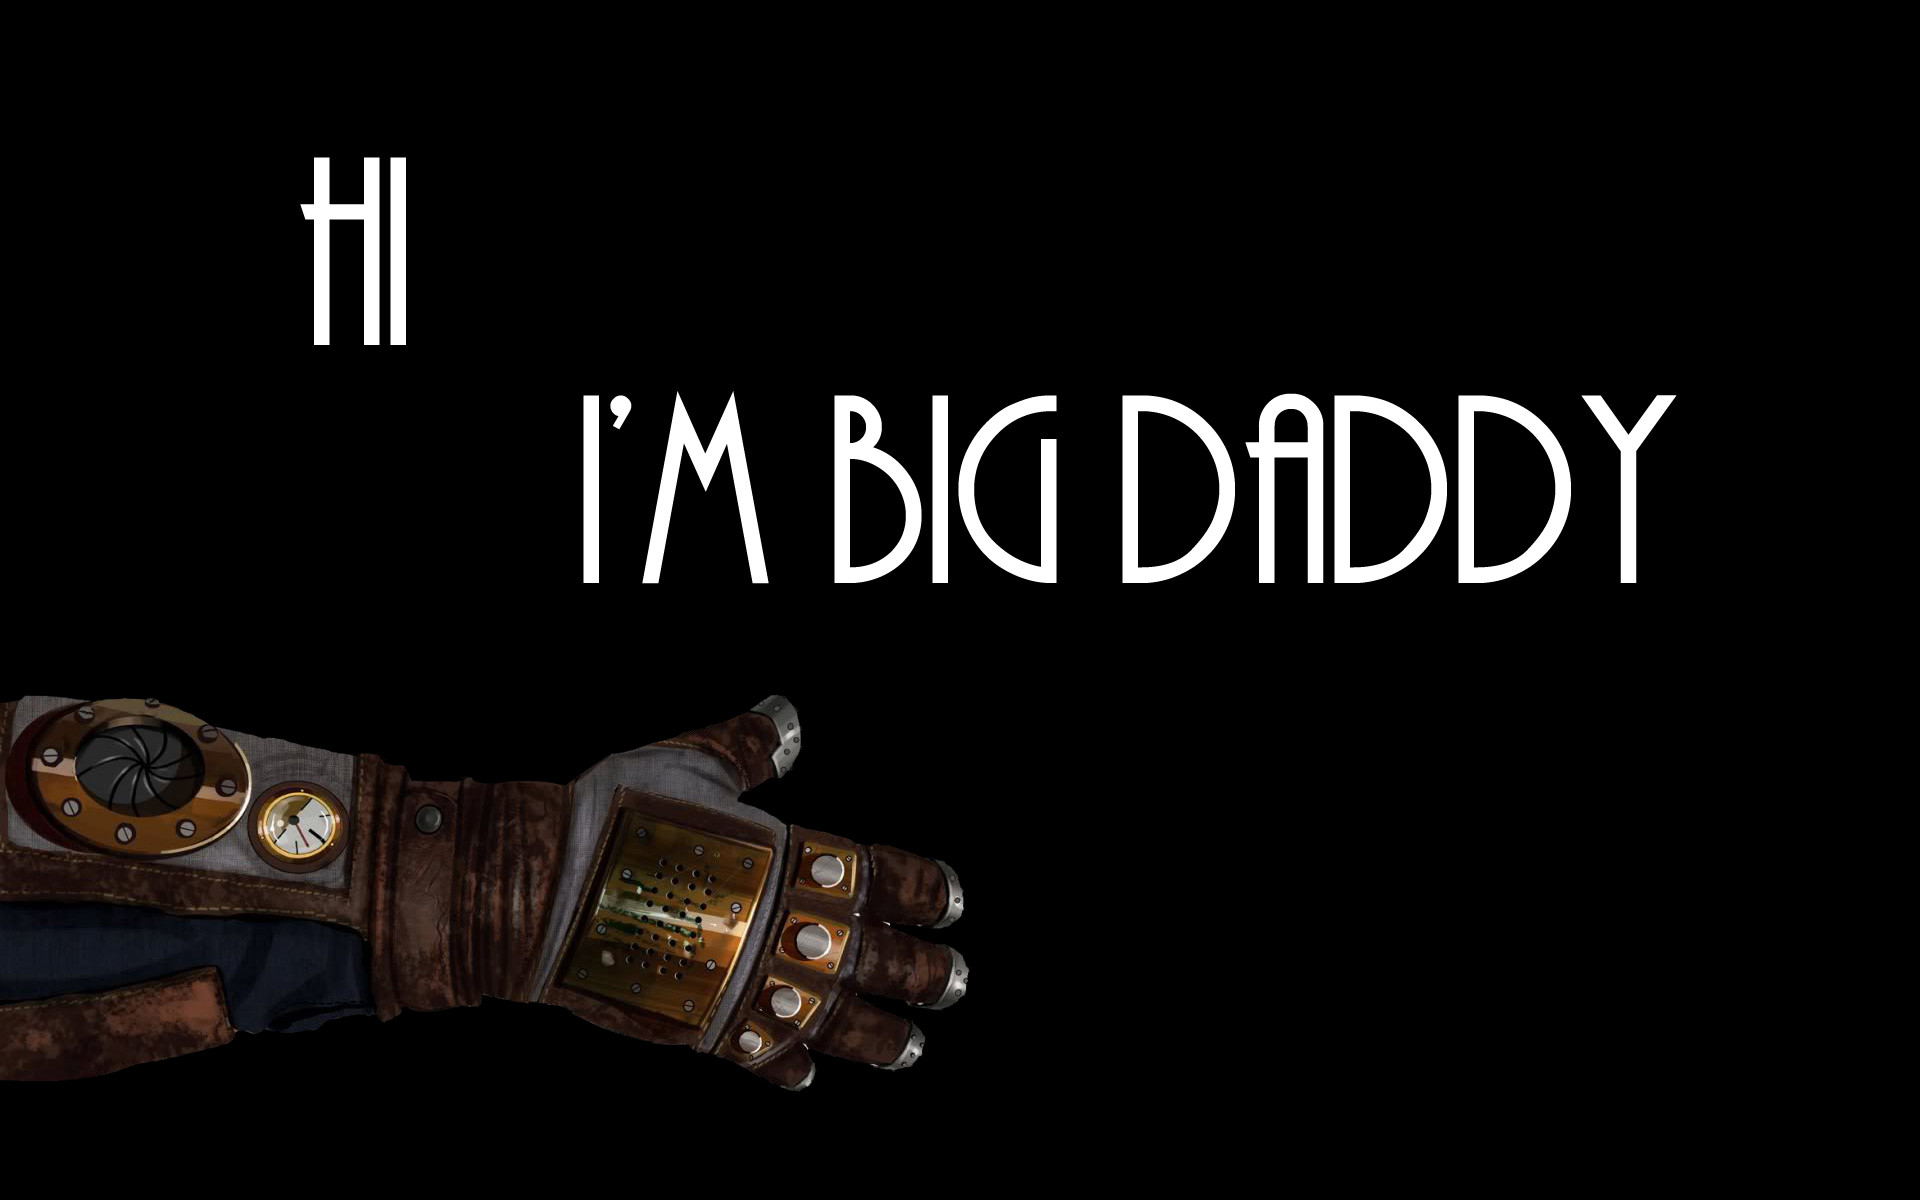 1920x1200 Collection of Big Daddy Wallpaper on HDWallpapers Big Black Wallpapers